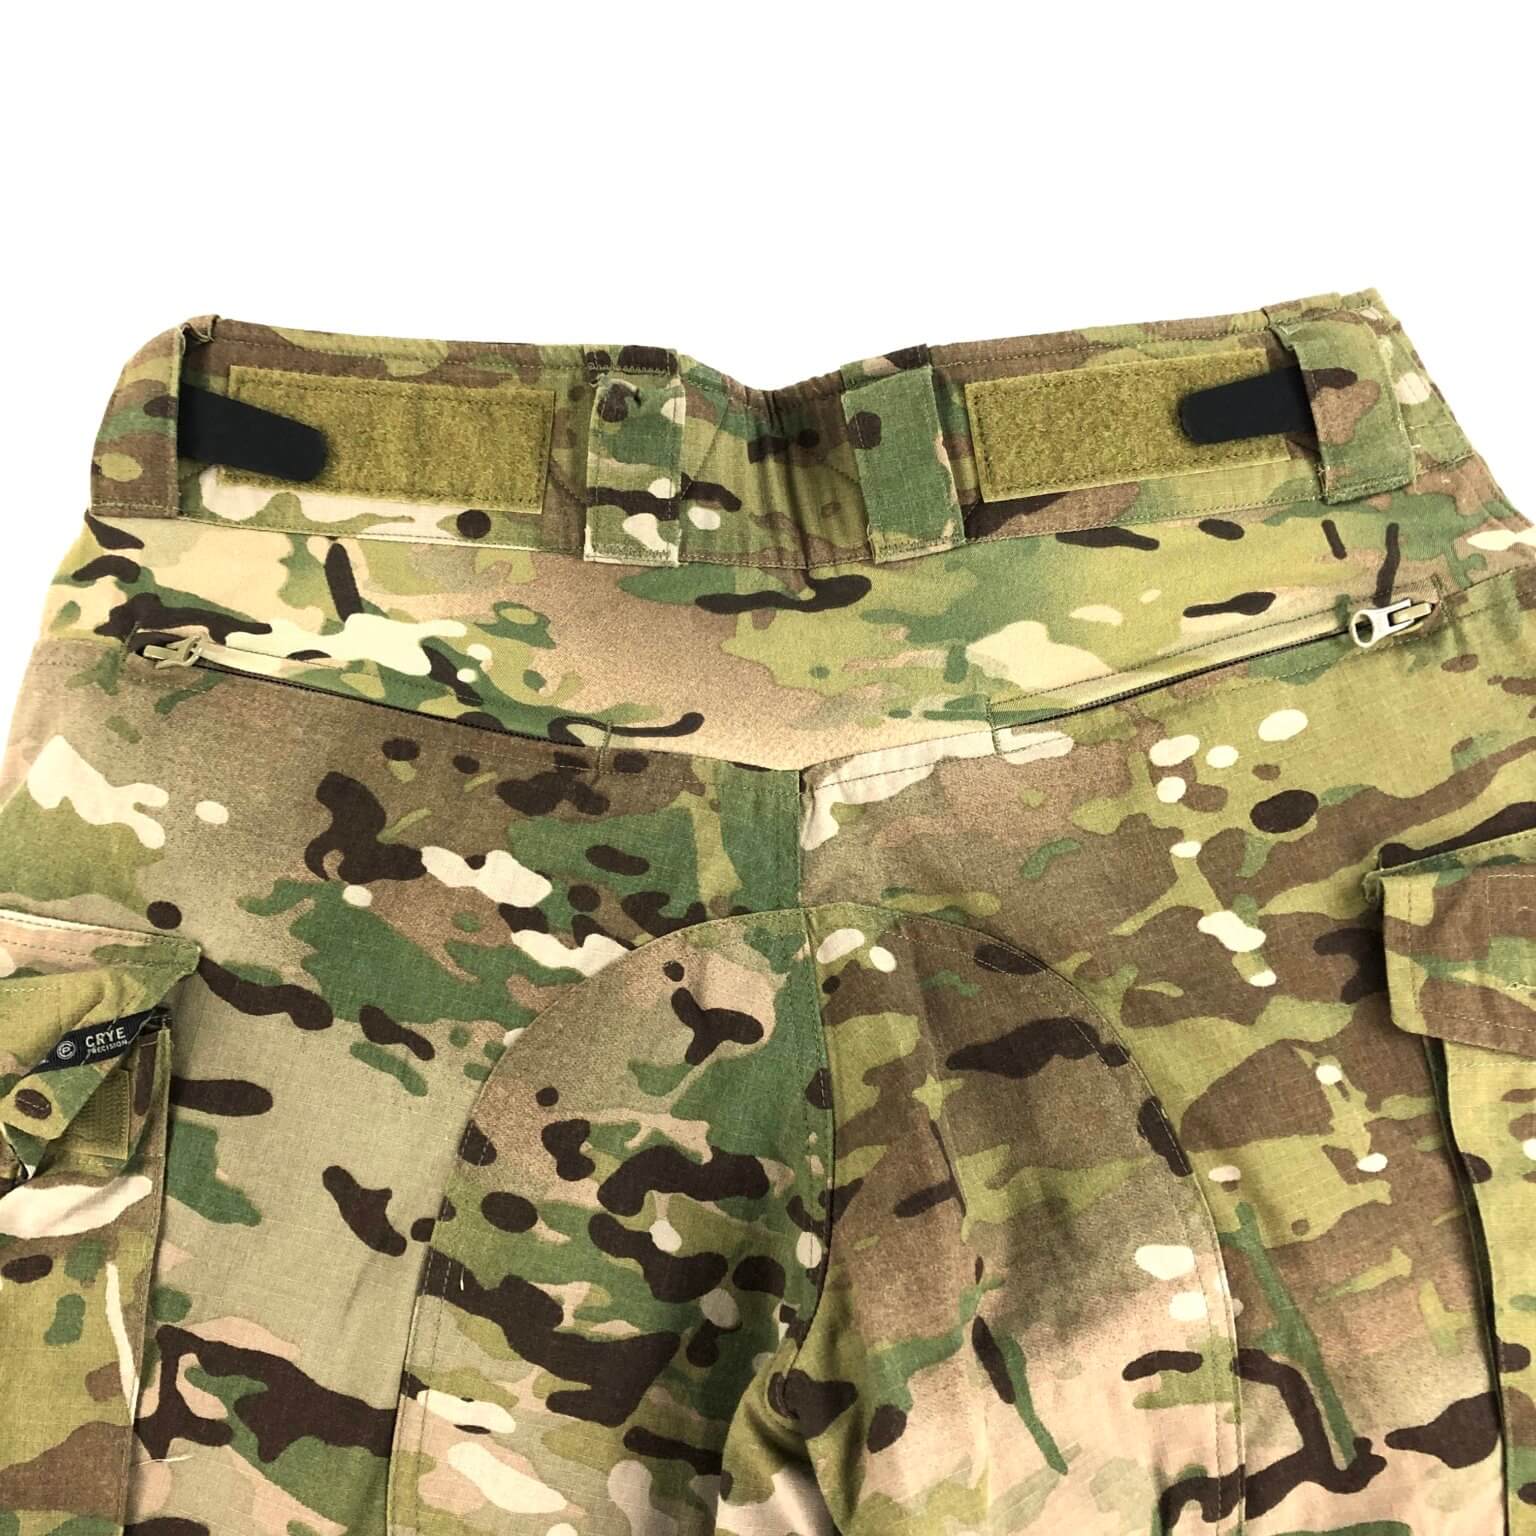 Crye Precision G3 FR Combat Pants, Multicam [Genuine Issue]